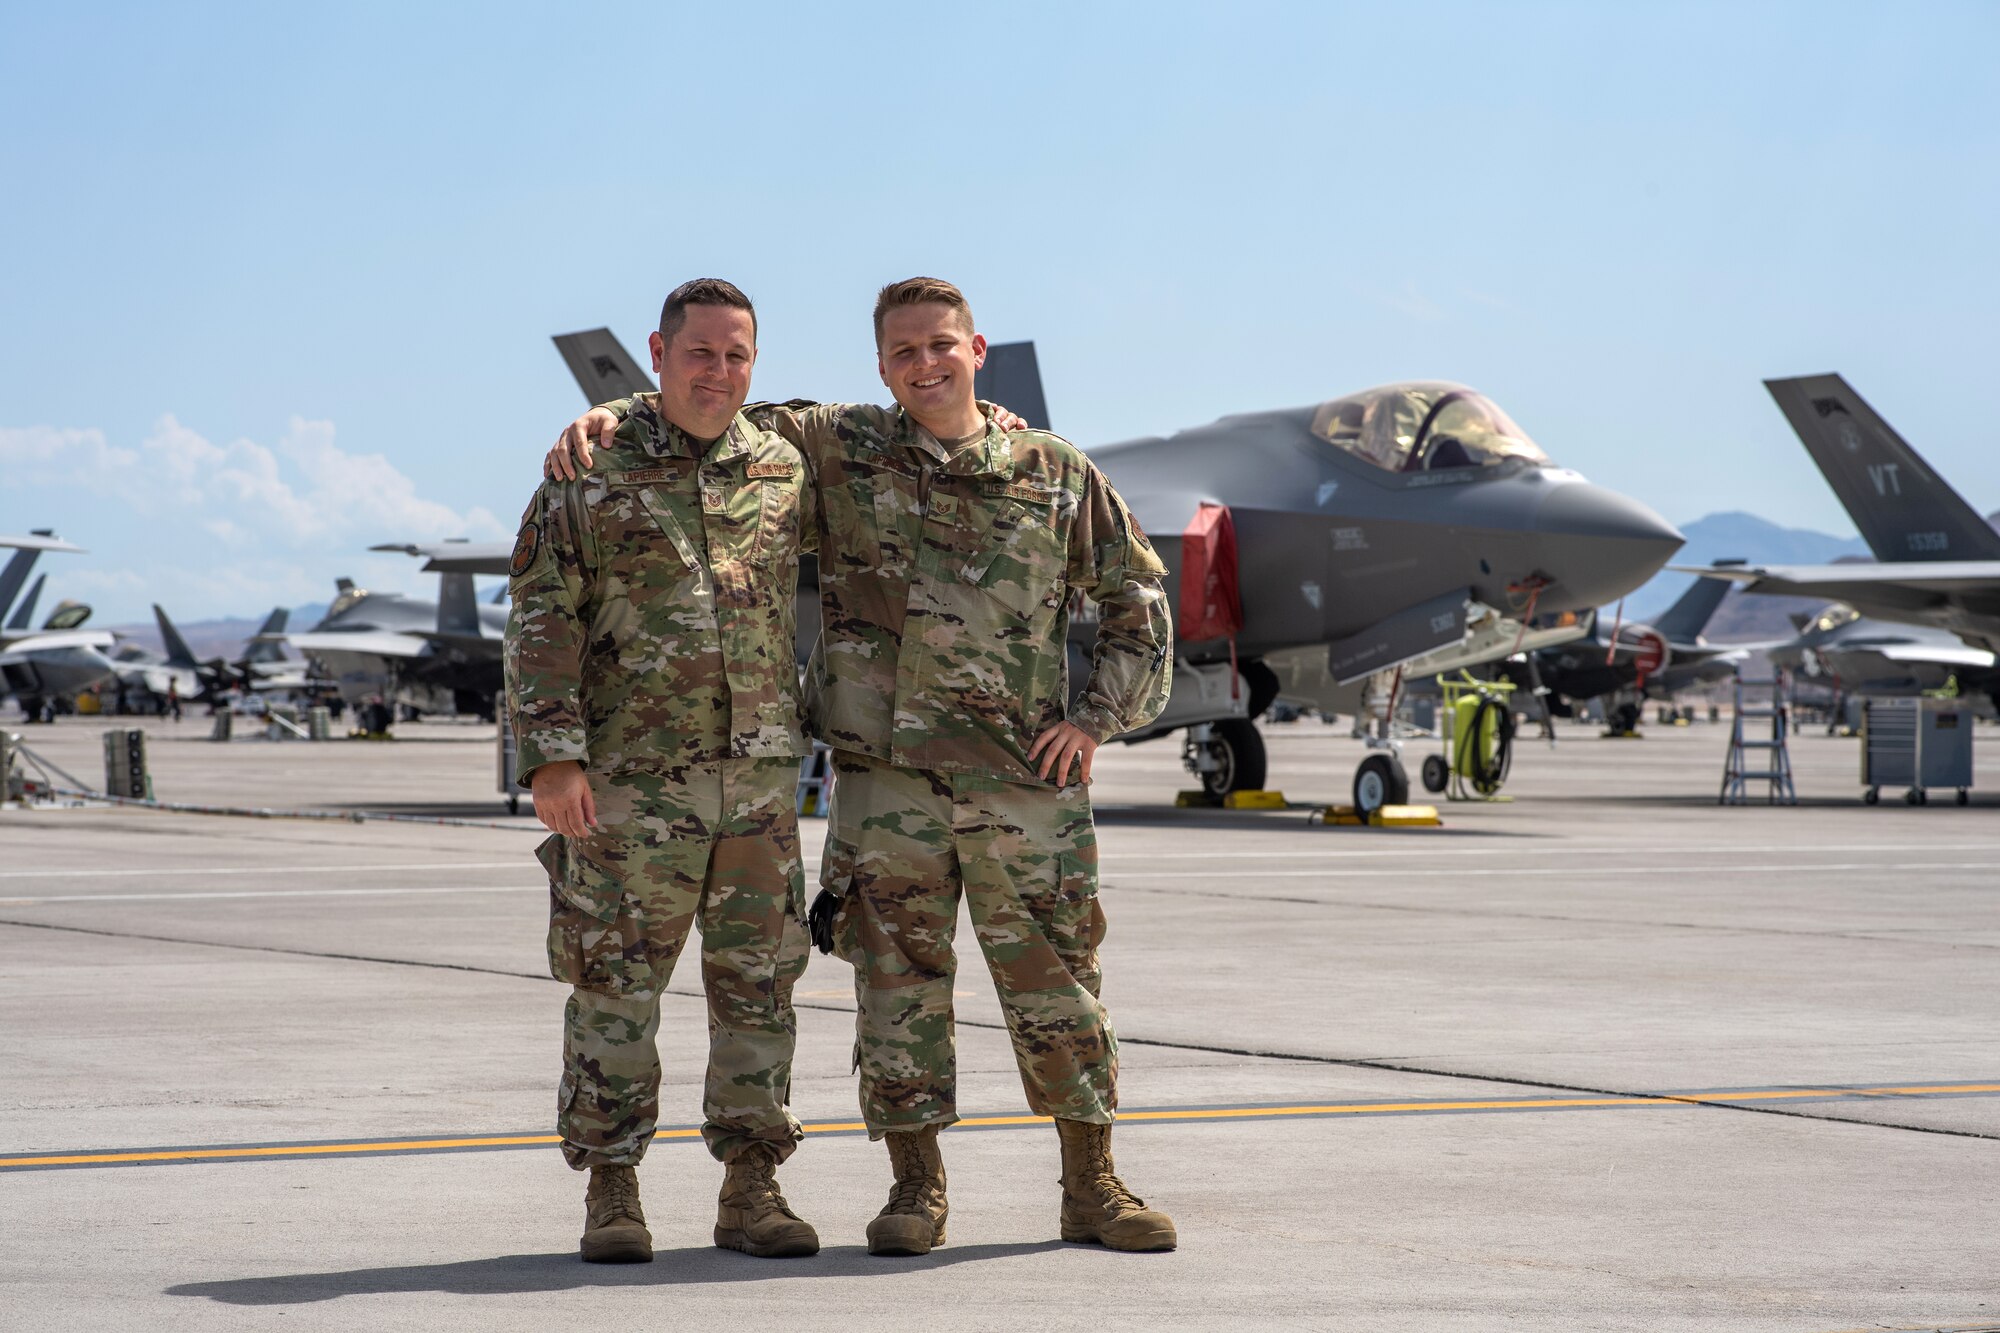 Tech. Sgt. David LaPierre stands with his son, Staff Sgt. Trevor LaPierre for a photo during Red Flag 21-3 at Nellis Air Force Base, Nevada.